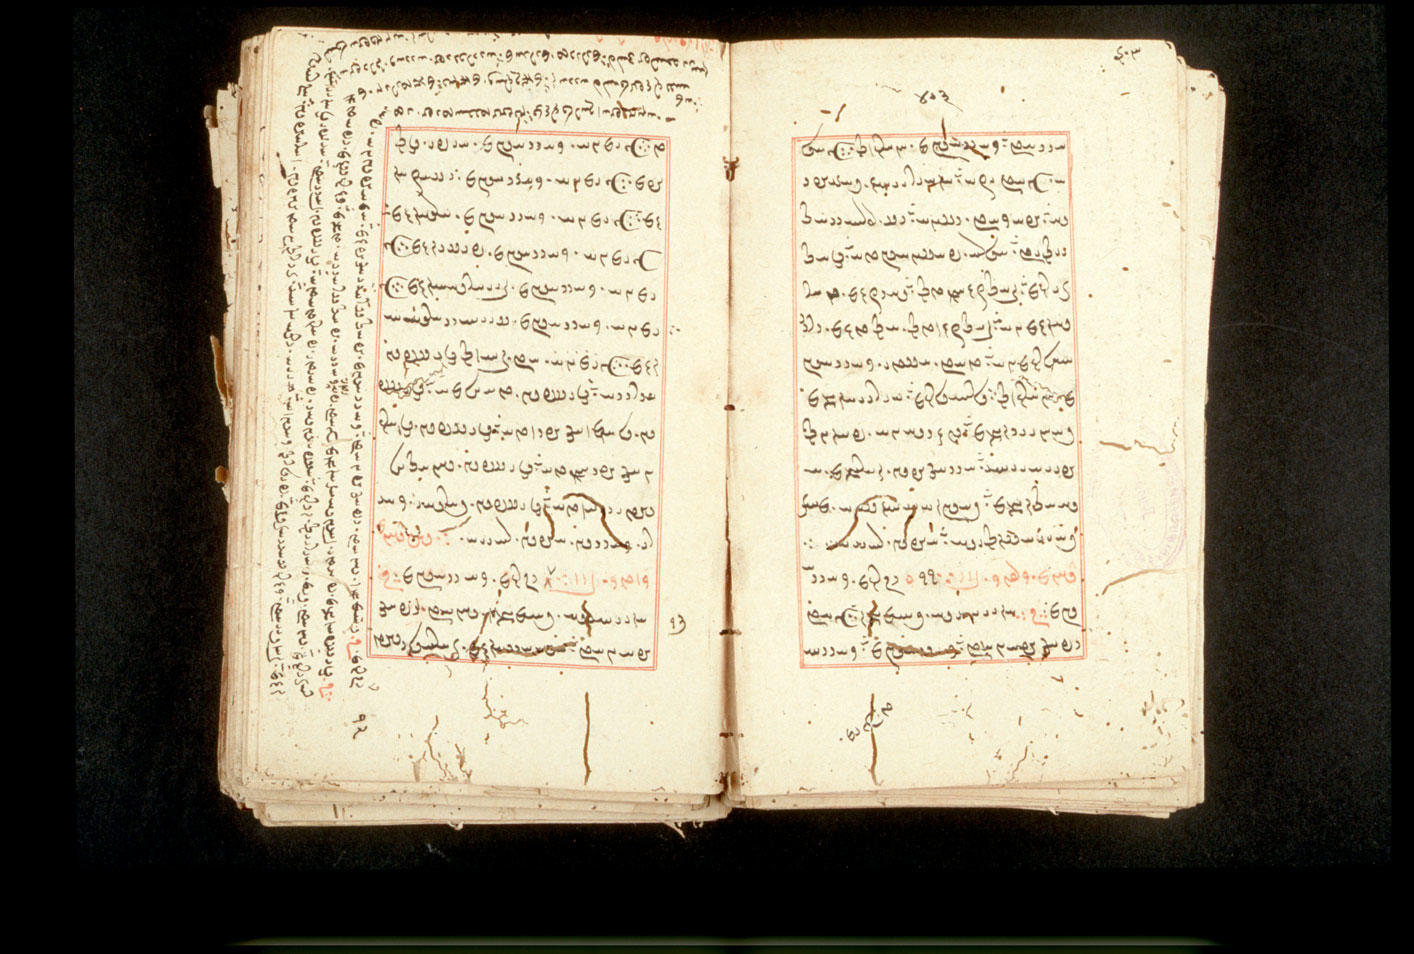 Folios 403v (right) and 404r (left)